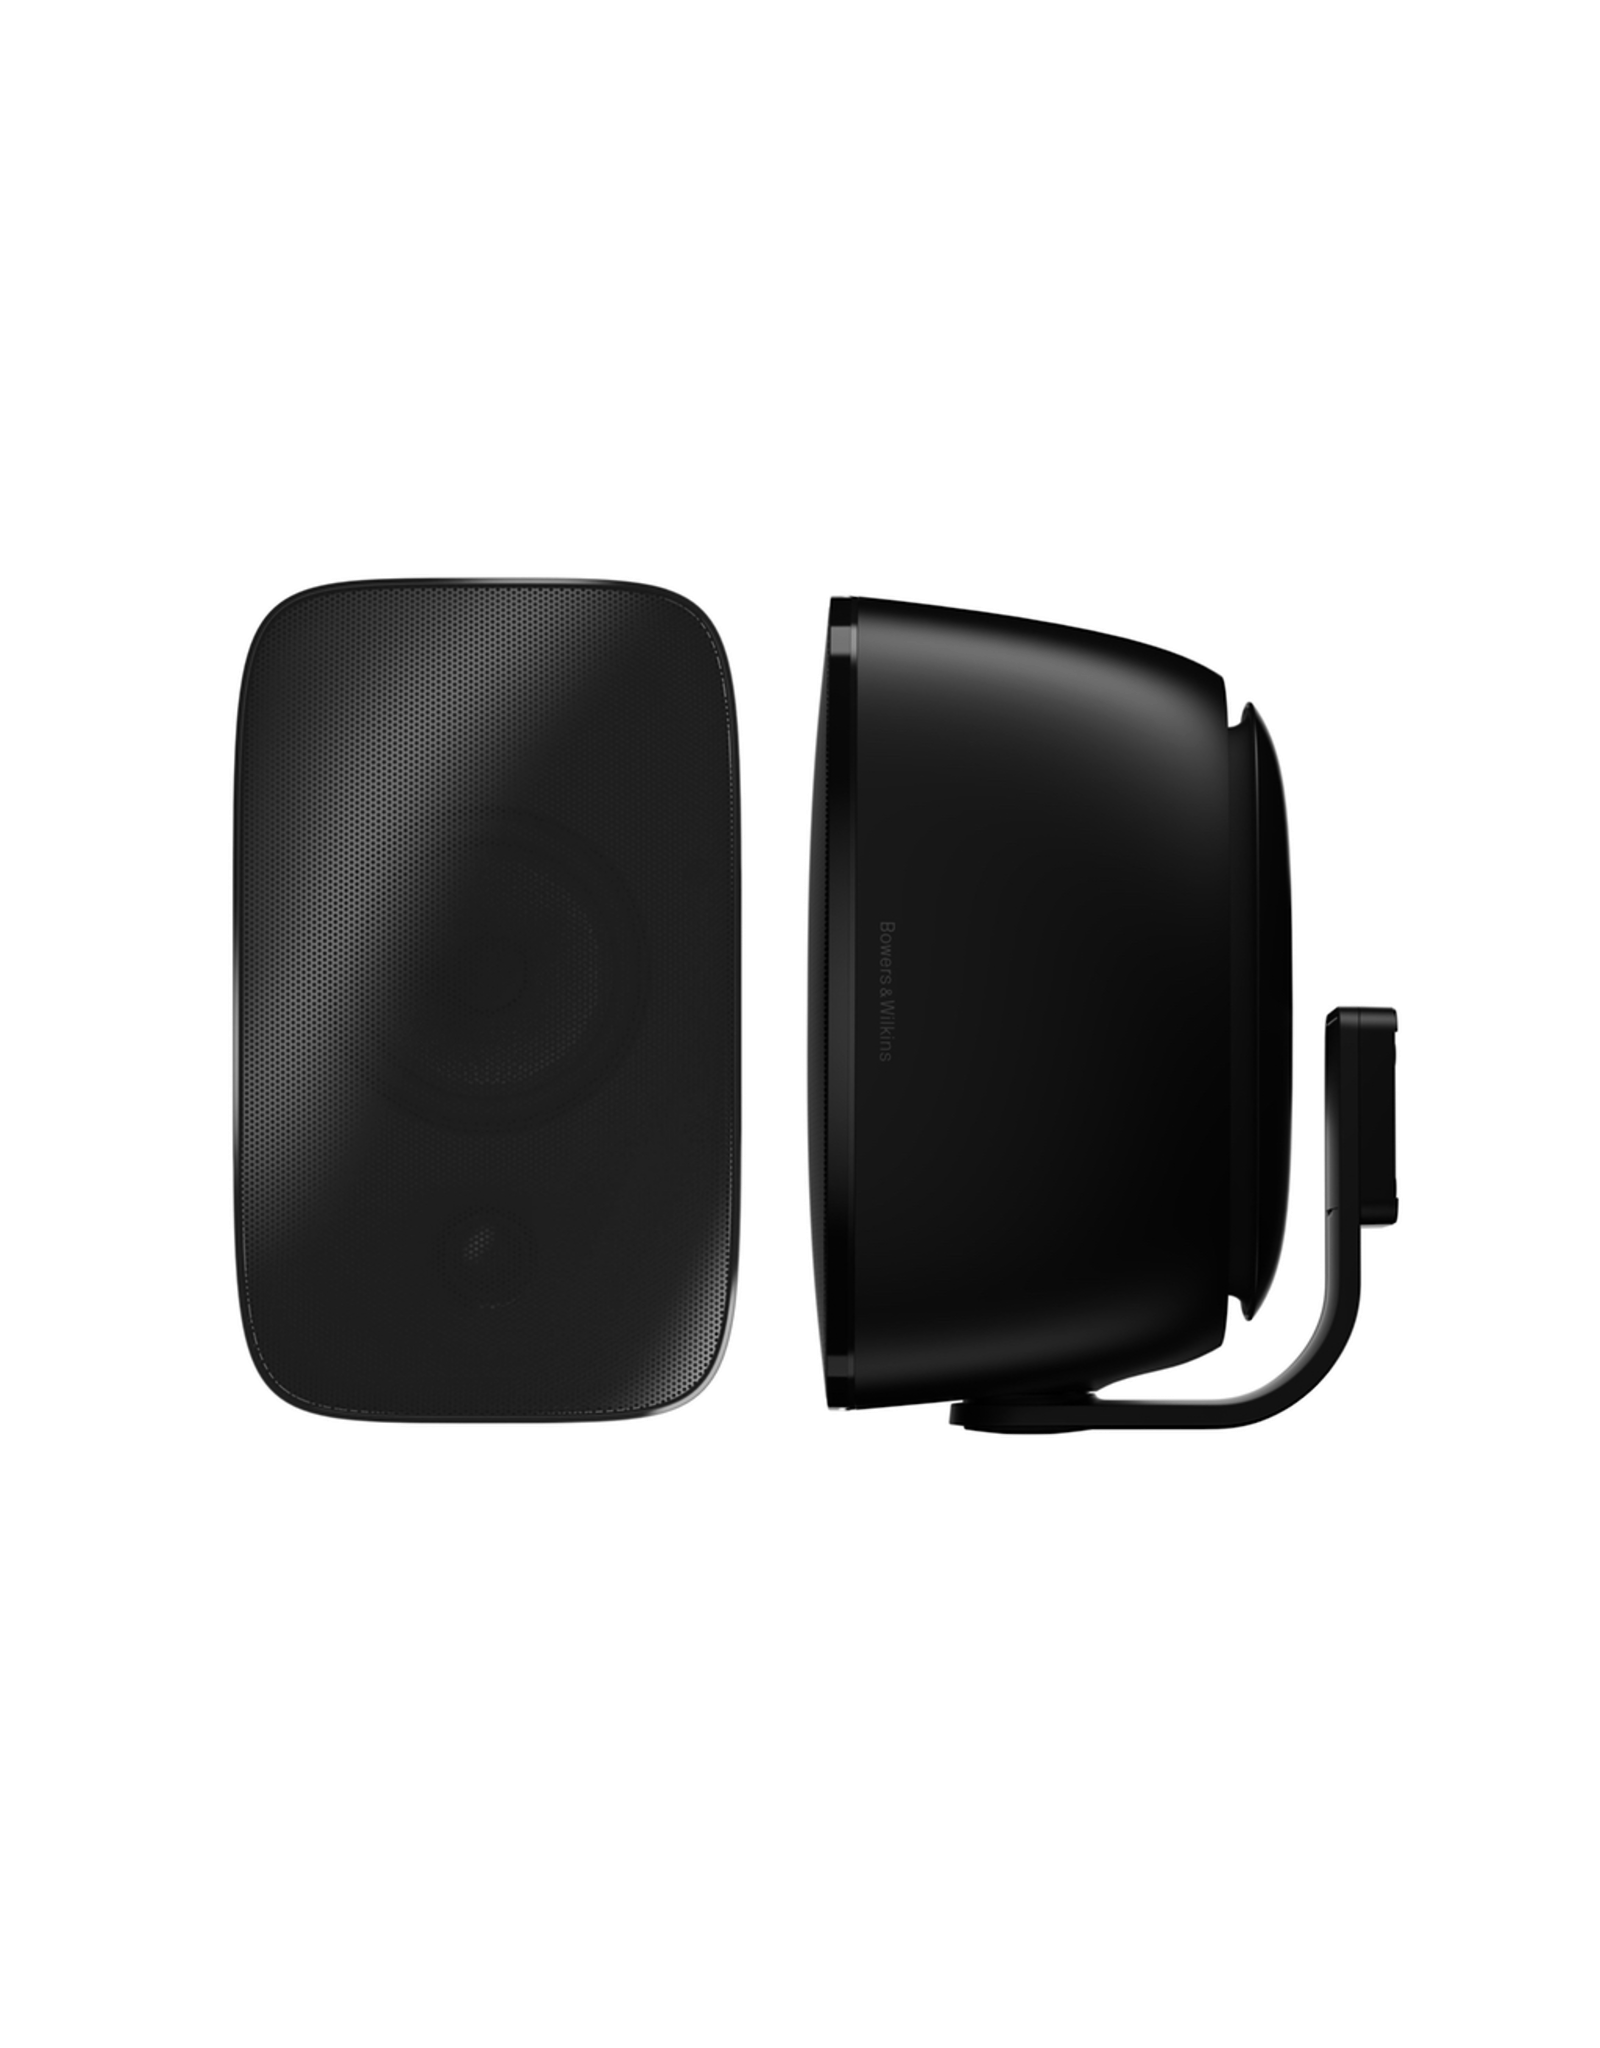 BOWERS & WILKINS B&W AM-1 Architectural Monitor (pair)